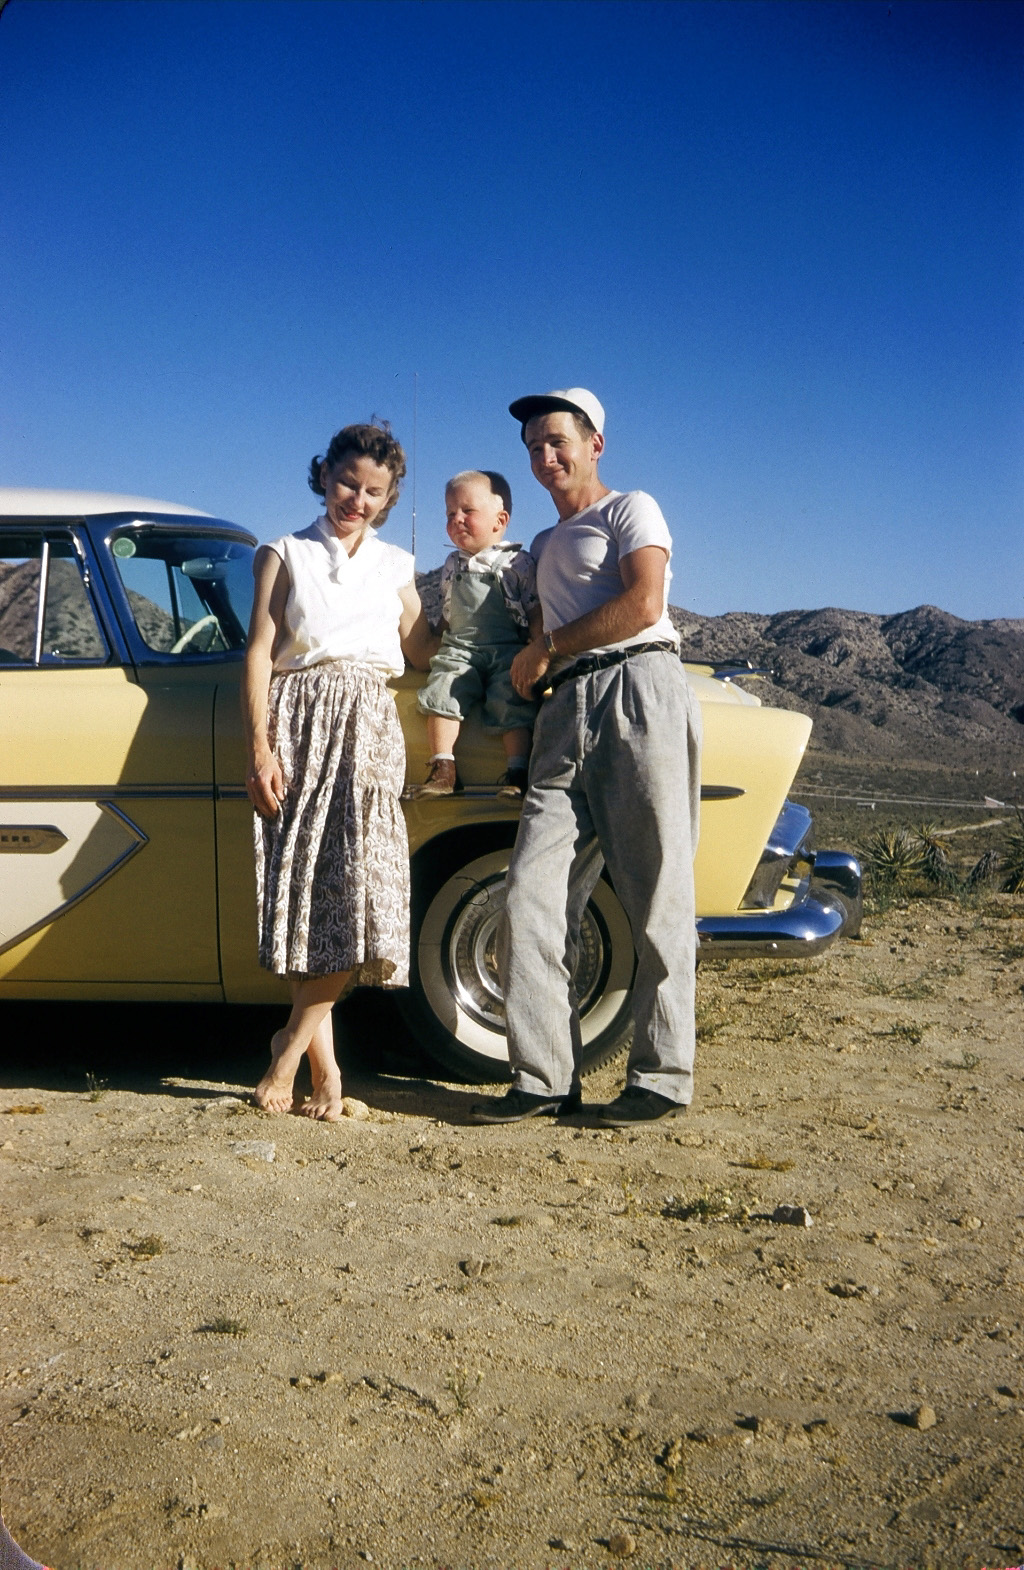 A trip back to the early, early days. My folks and I took a trip to one of my Dad's co-worker's cabin way out in the Mojave desert. Here we are, with our 1956 Plymouth Belvedere. We kept the car well into the 1960s, and I remember it had the infamous push button transmission selector.

The man who took the picture, and who owned the cabin, was Mischa Pelz, who was a fairly prominent photographer in Southern California back in those days. View full size.

